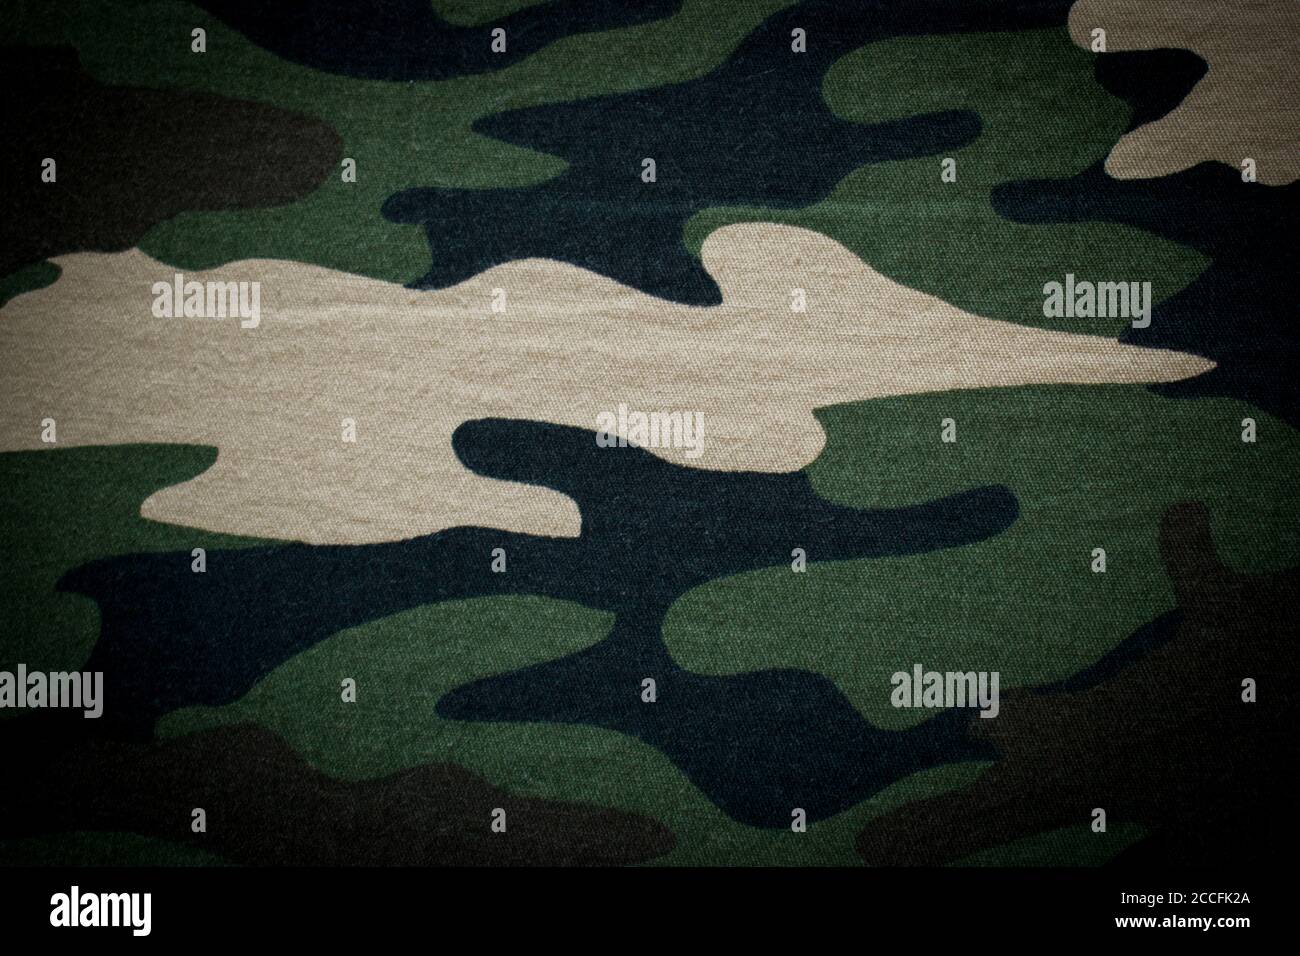 Military camouflage cloth, fabric background with vignette Stock Photo